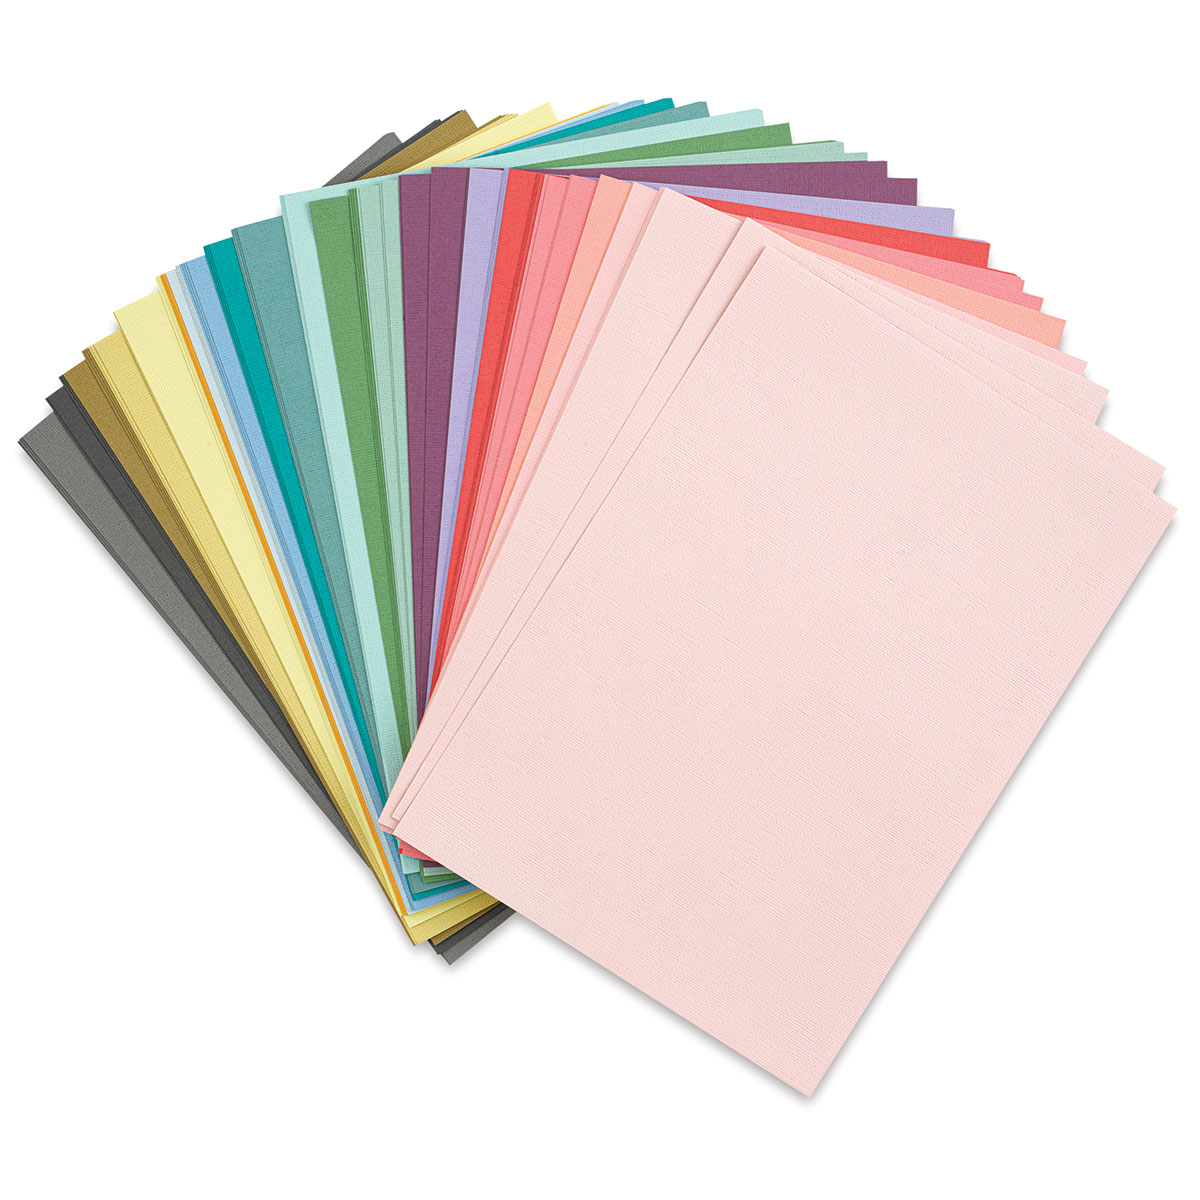 200 Colored Cardstock Paper,Colorful Card Stock 250GSM Heavy